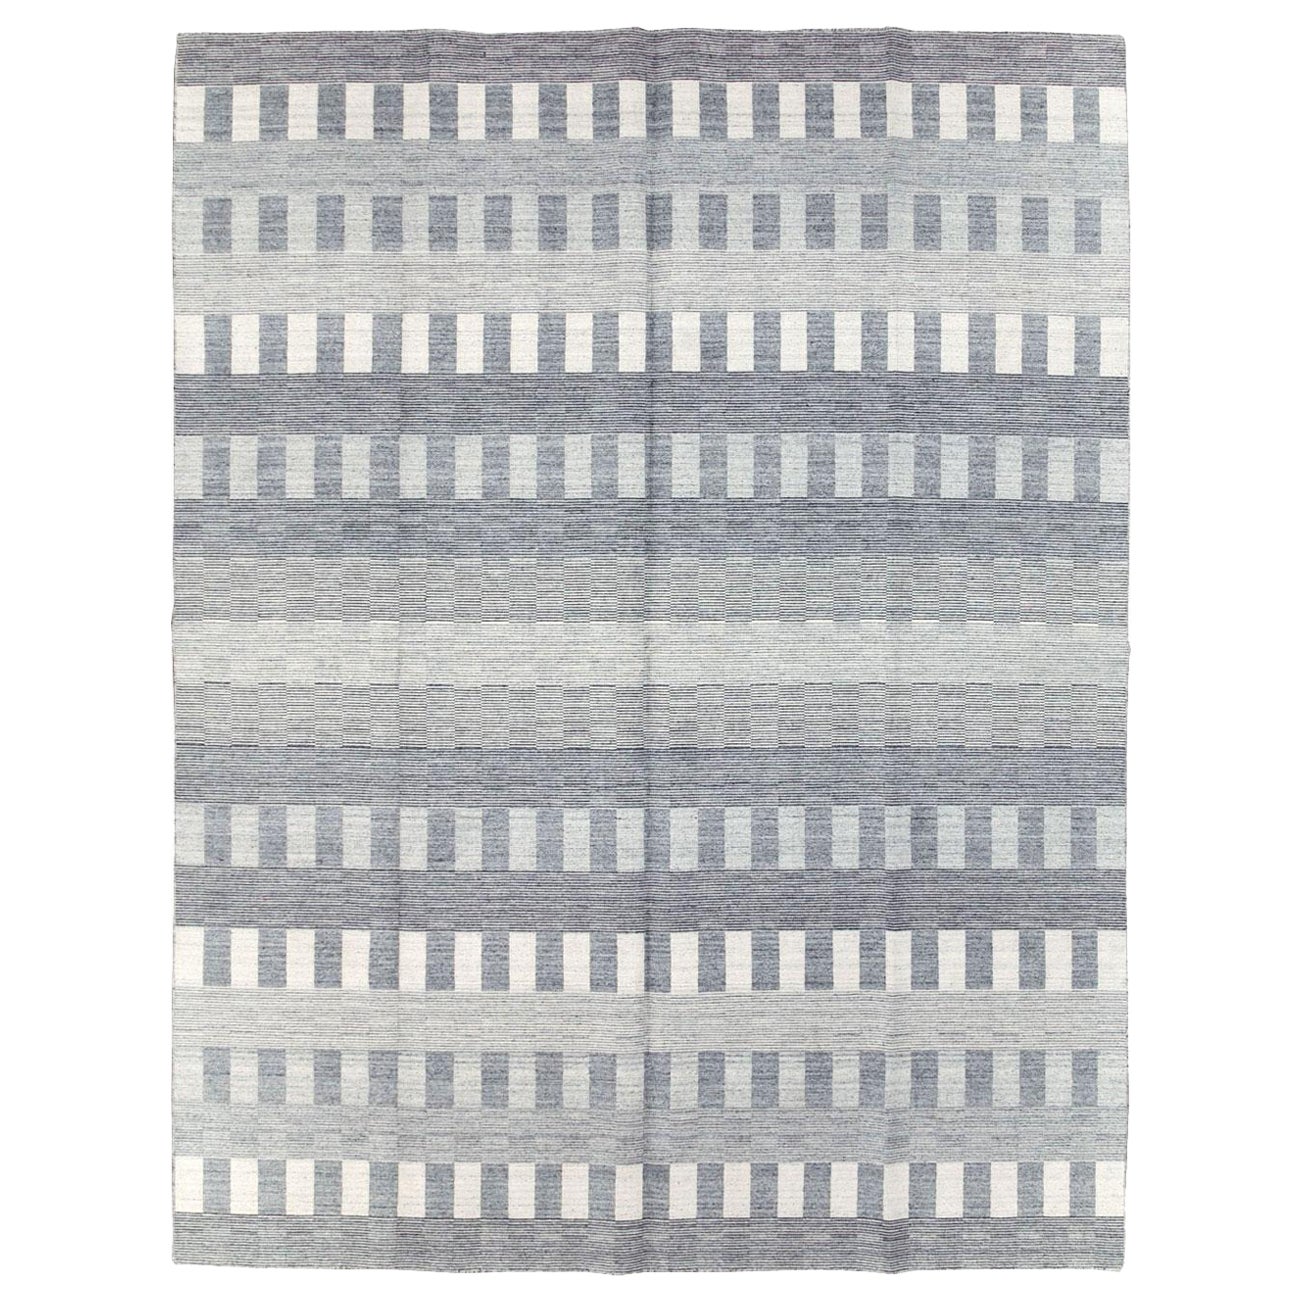 Galerie Shabab Collection Contemporary Turkish Flatweave Room Size Carpet